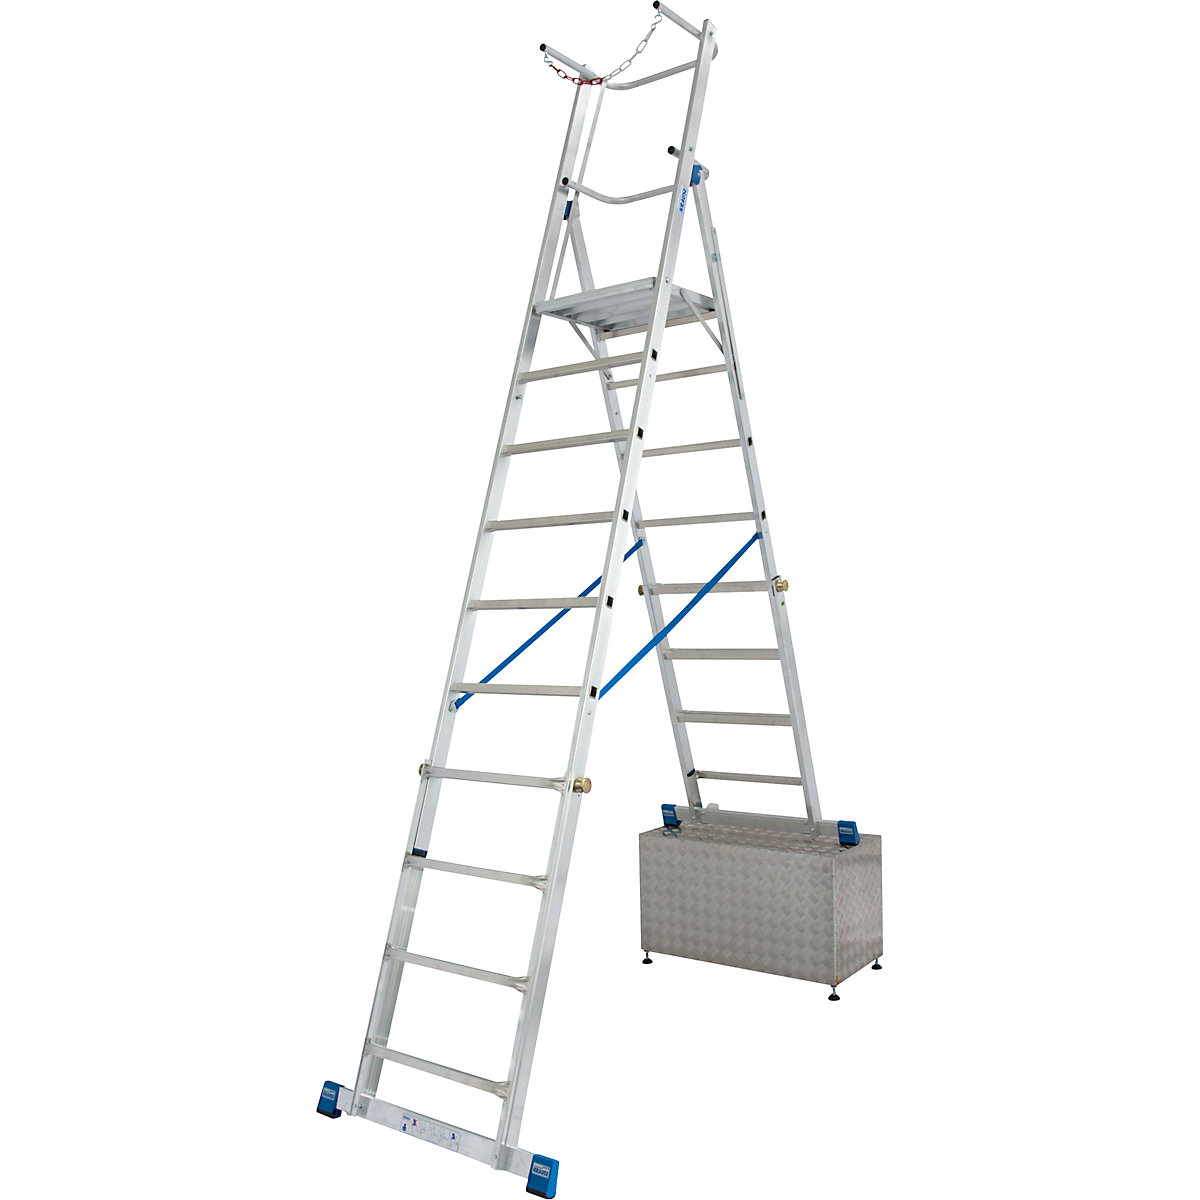 Telescopic mobile safety steps – KRAUSE, height adjustable through ClickMatic system, 8 – 10 rungs-8